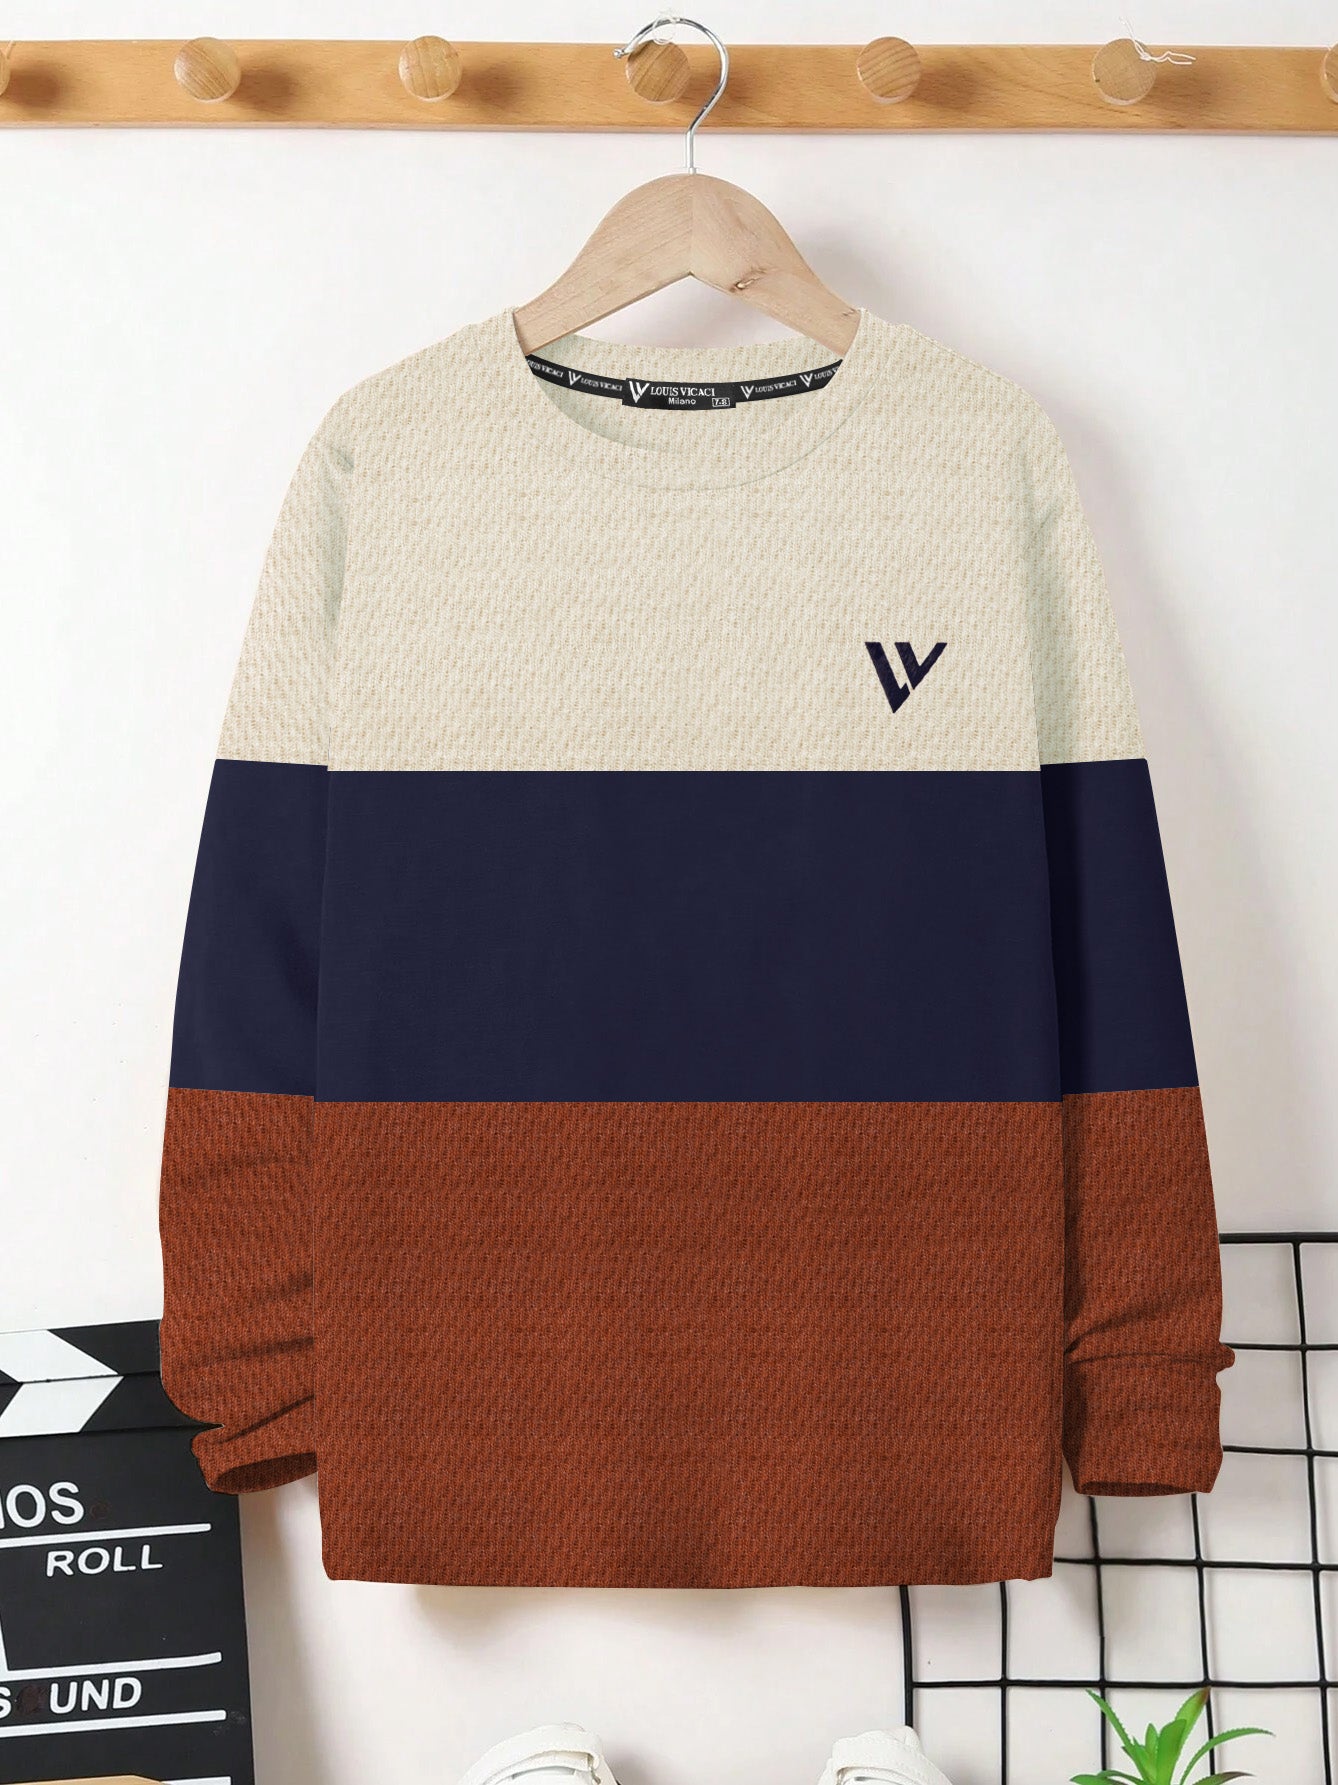 LV Crew Neck Long Sleeve Thermal Tee Shirt For Kids-Off White with Blue & Brown-BE969/BR13216